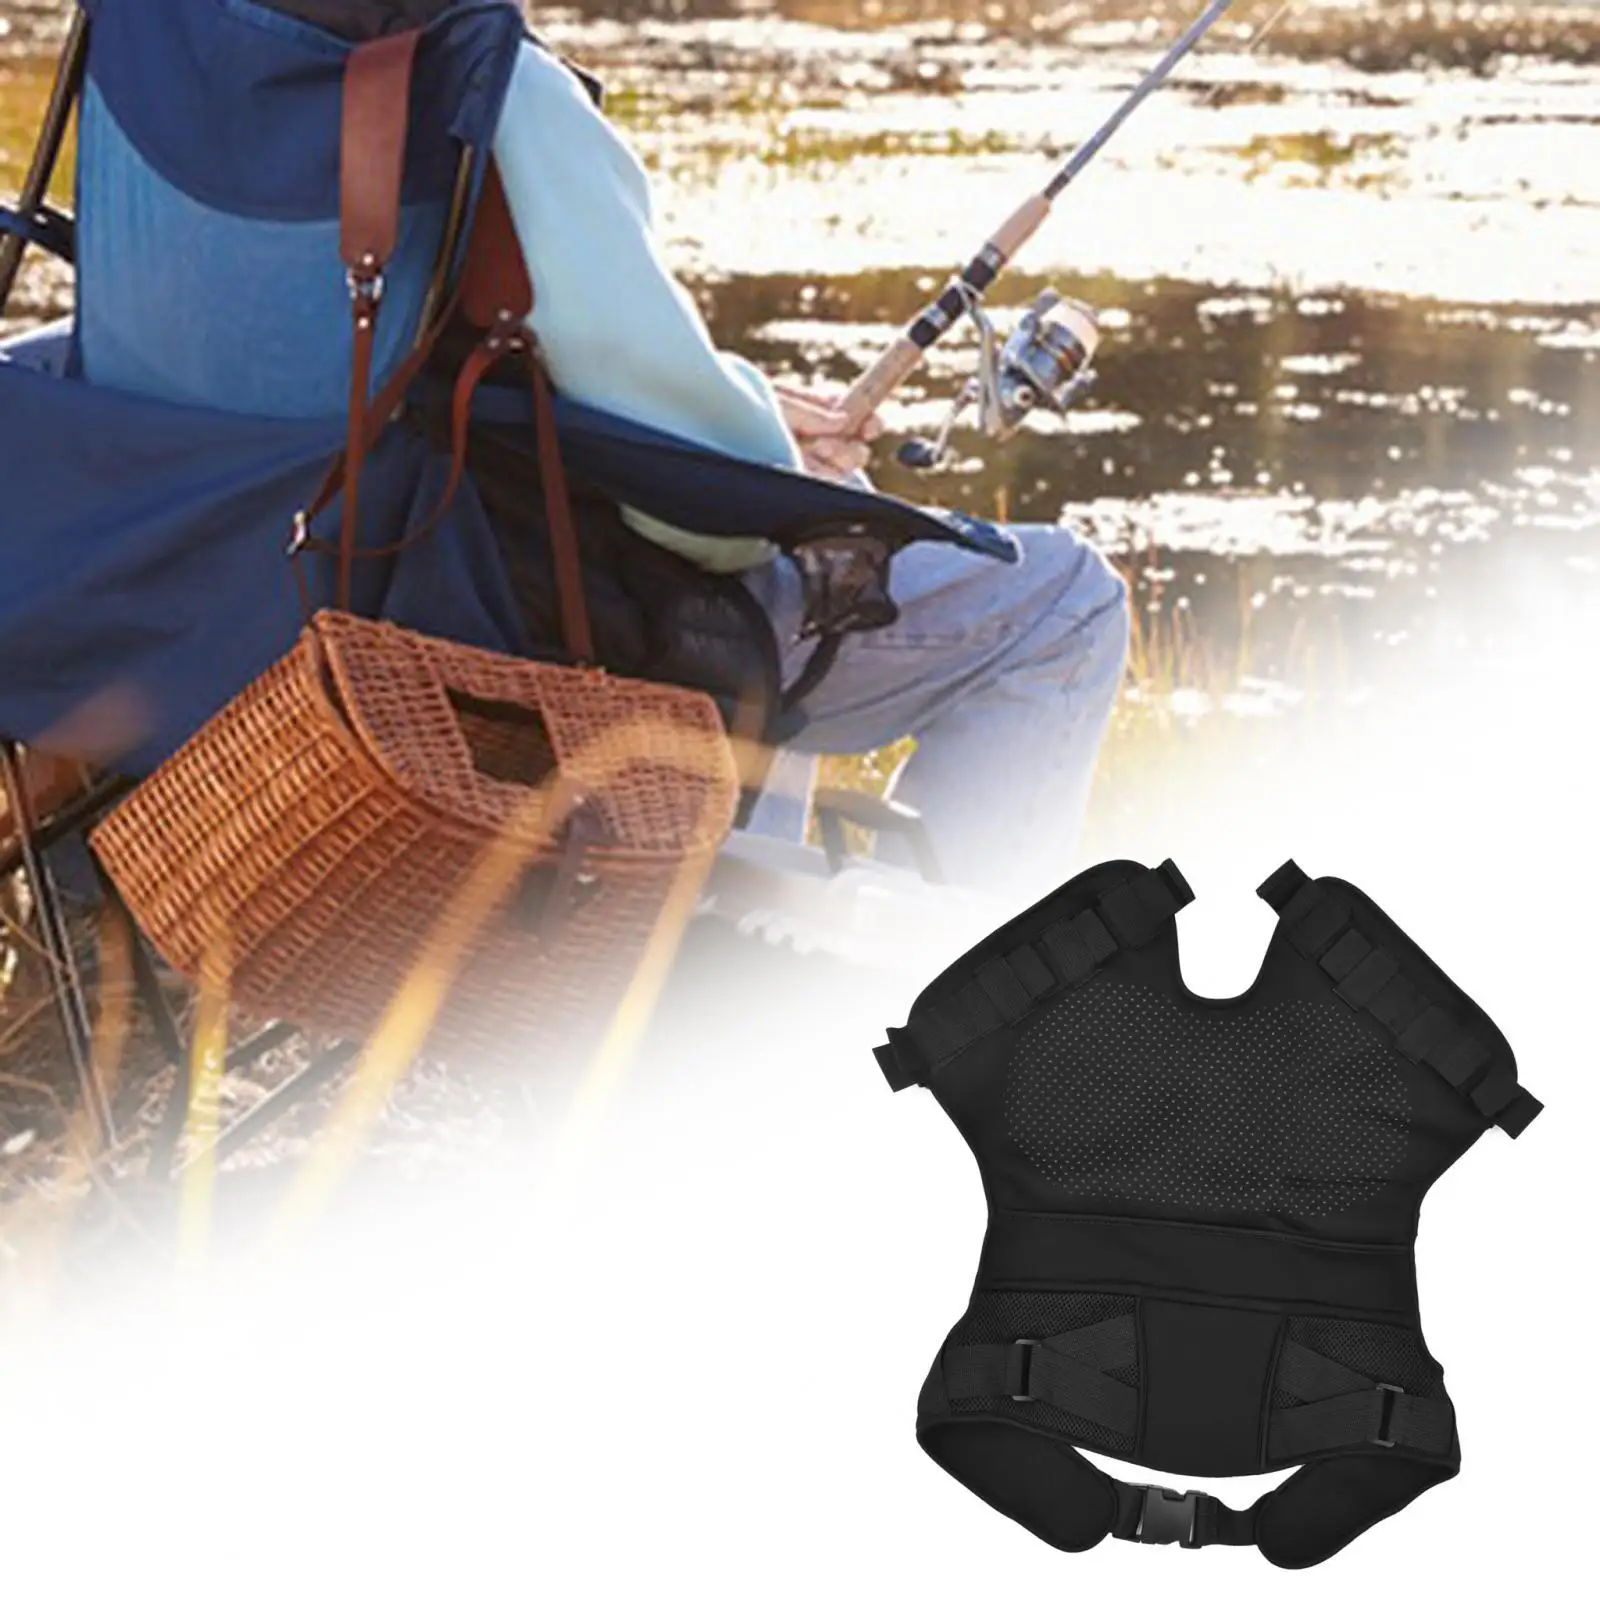 Fishing Seating Cushion Multifunction Comfortable Removable Buttock Protection Shorts for Lake Outdoor Canoe Ice Fishing Picnic